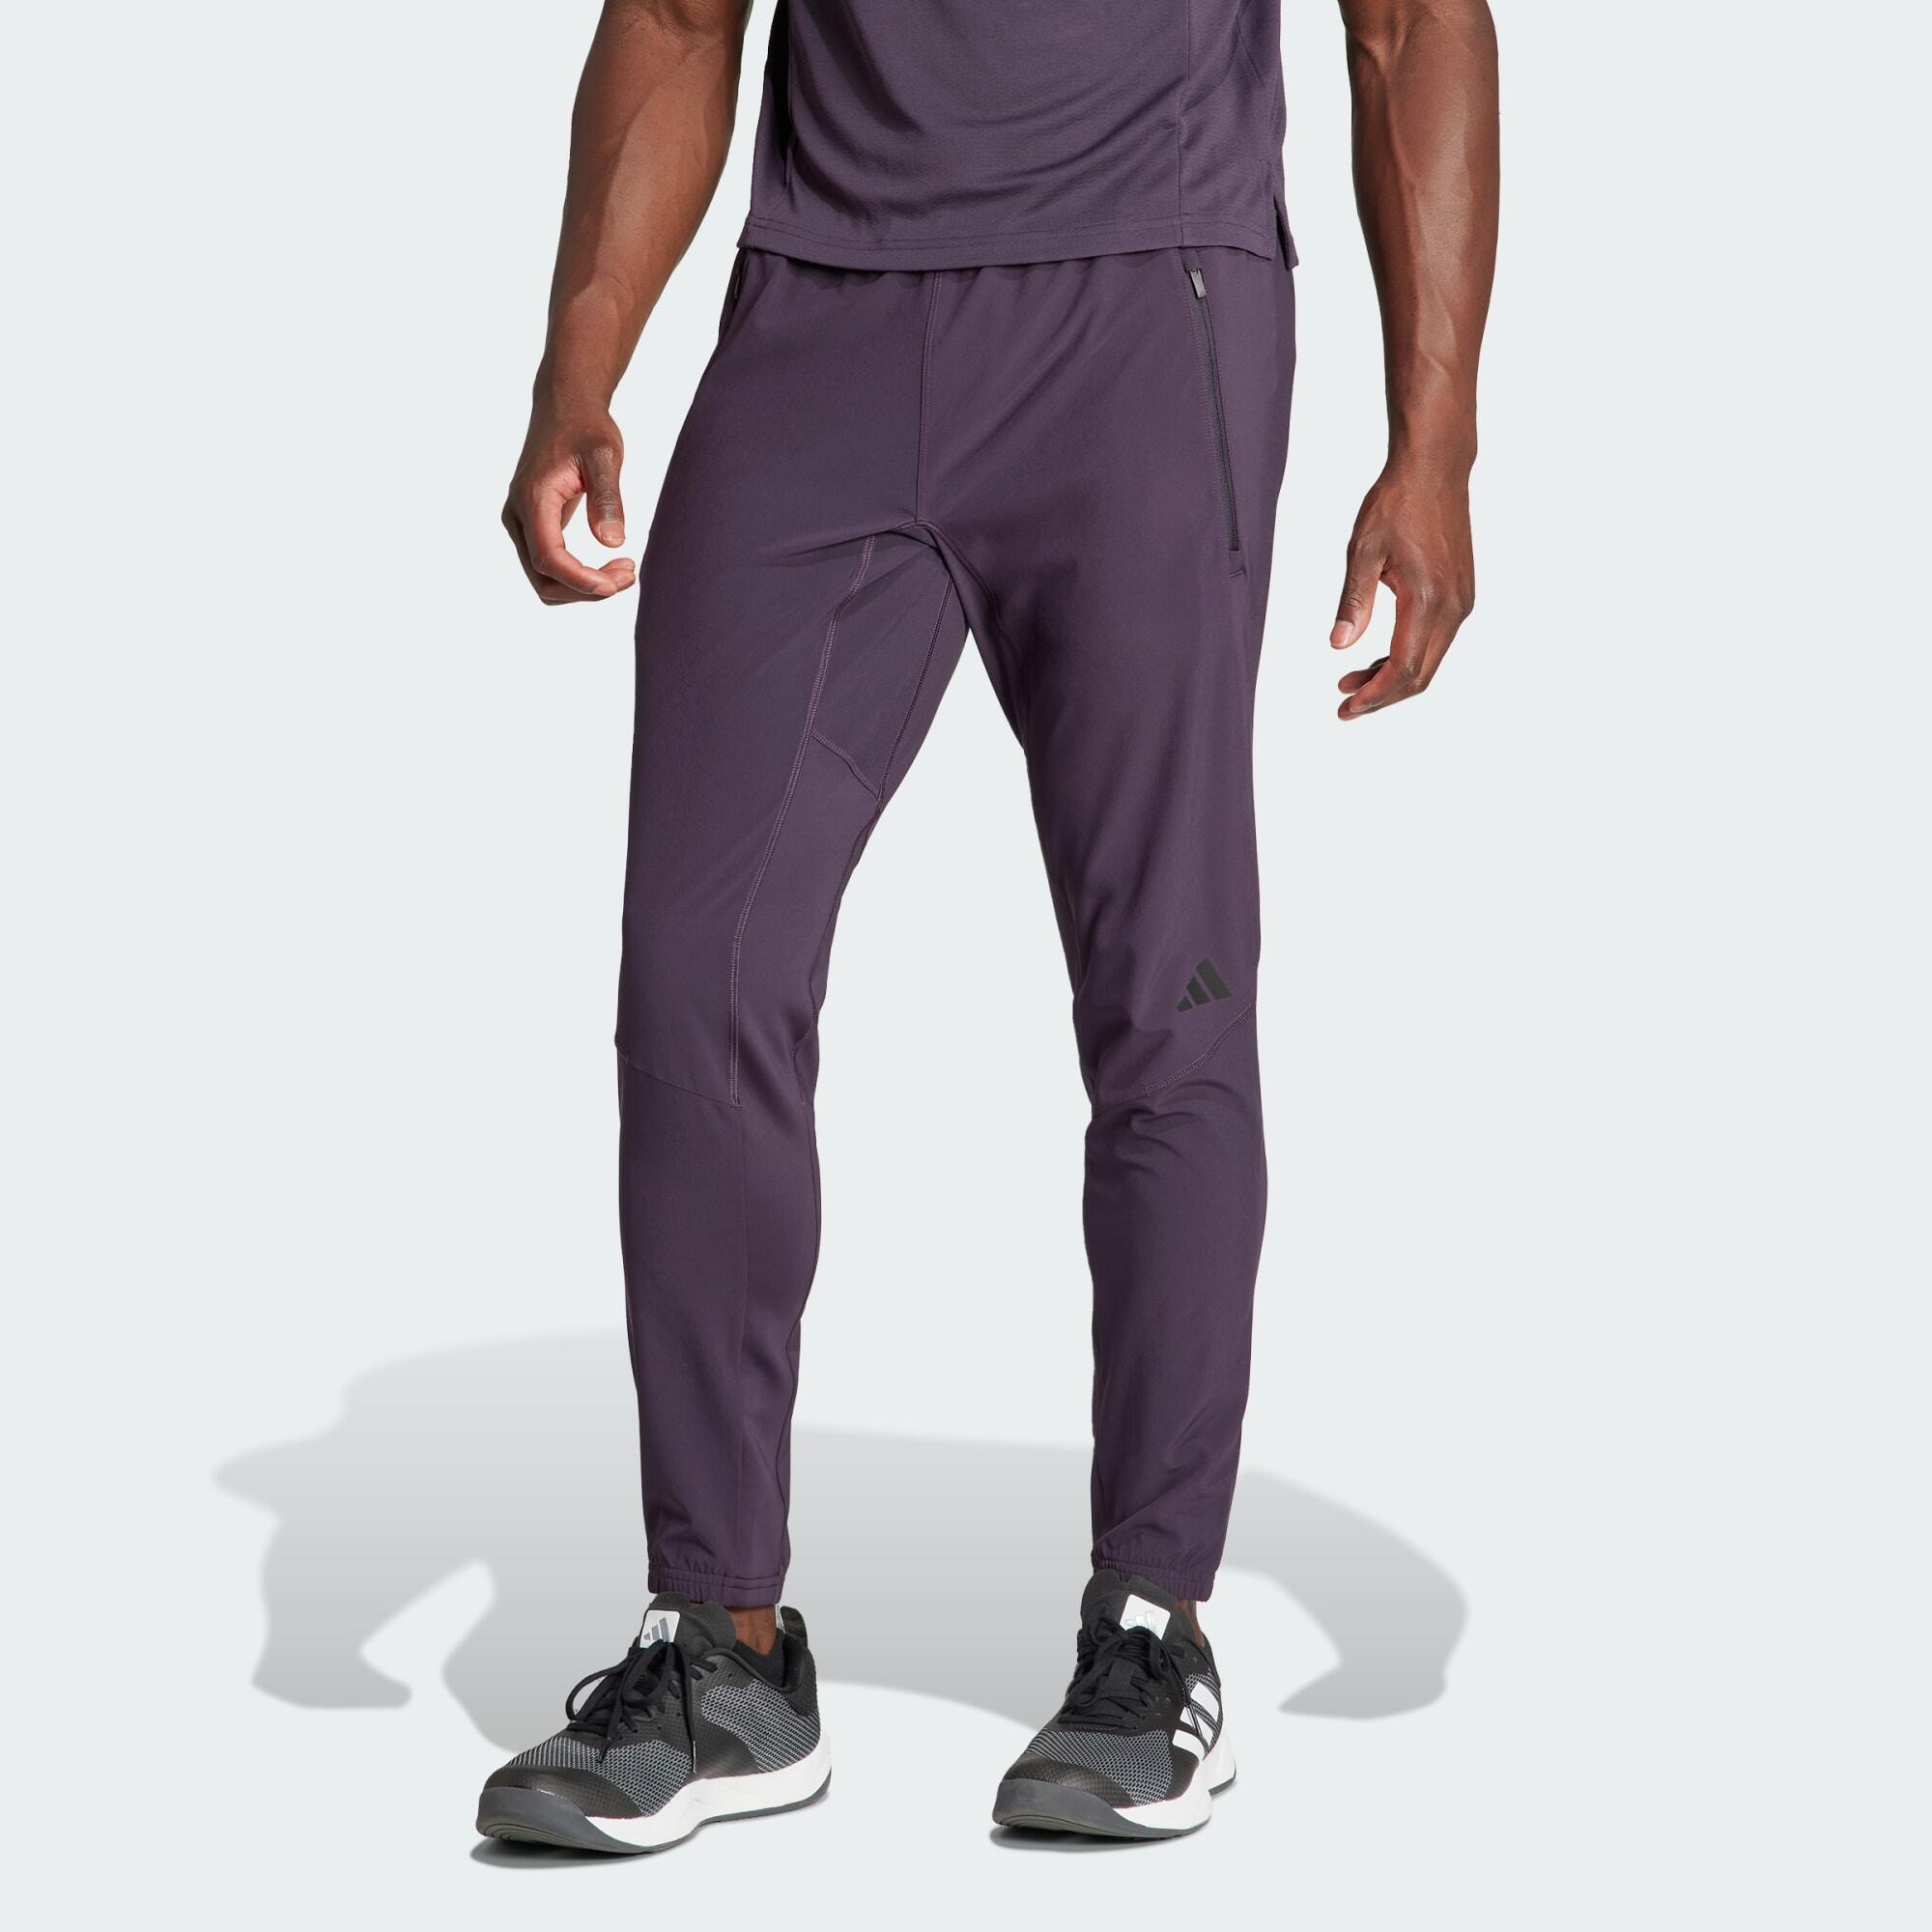 ADIDAS Designed for Training Workout Pants